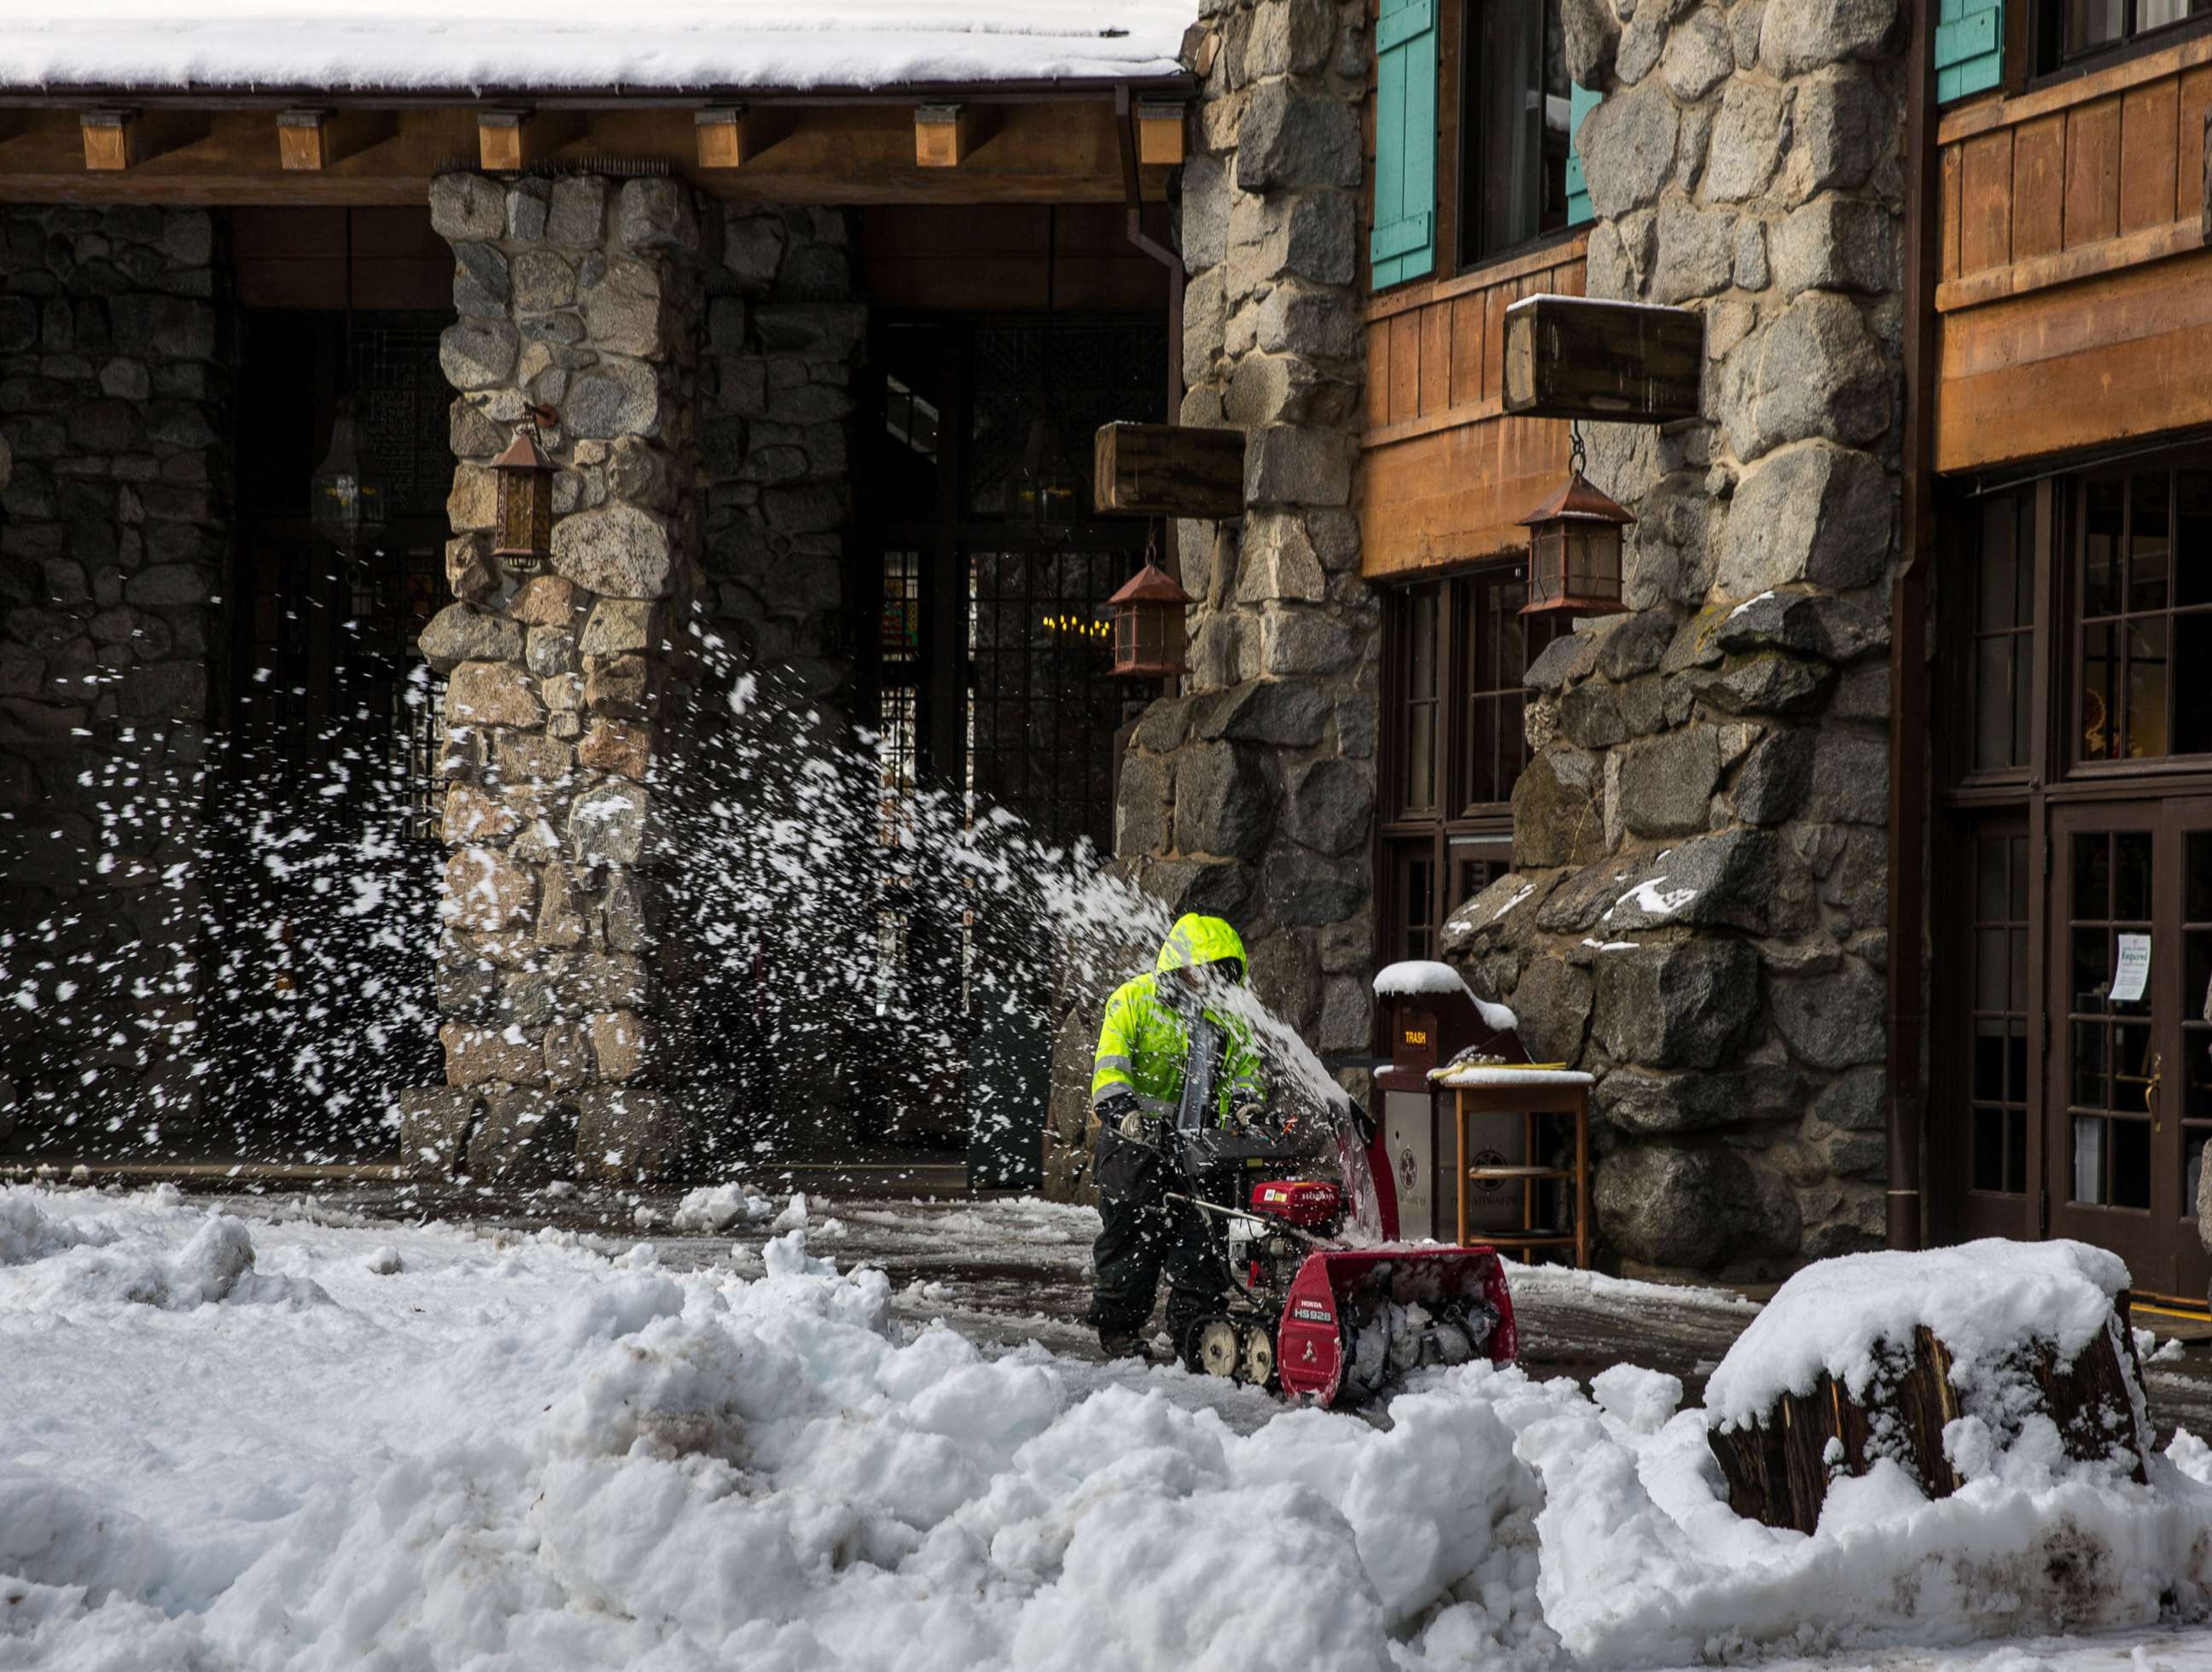 PHOTO: A worker snowplows sidewalks after major Pacific storm dumps a foot of in snow in Yosemite Valley and 8-10 feet of powder in the higher elevations of the Park and along the Sierra Nevada crest in Yosemite National Park, Calif. Dec. 16, 2021.